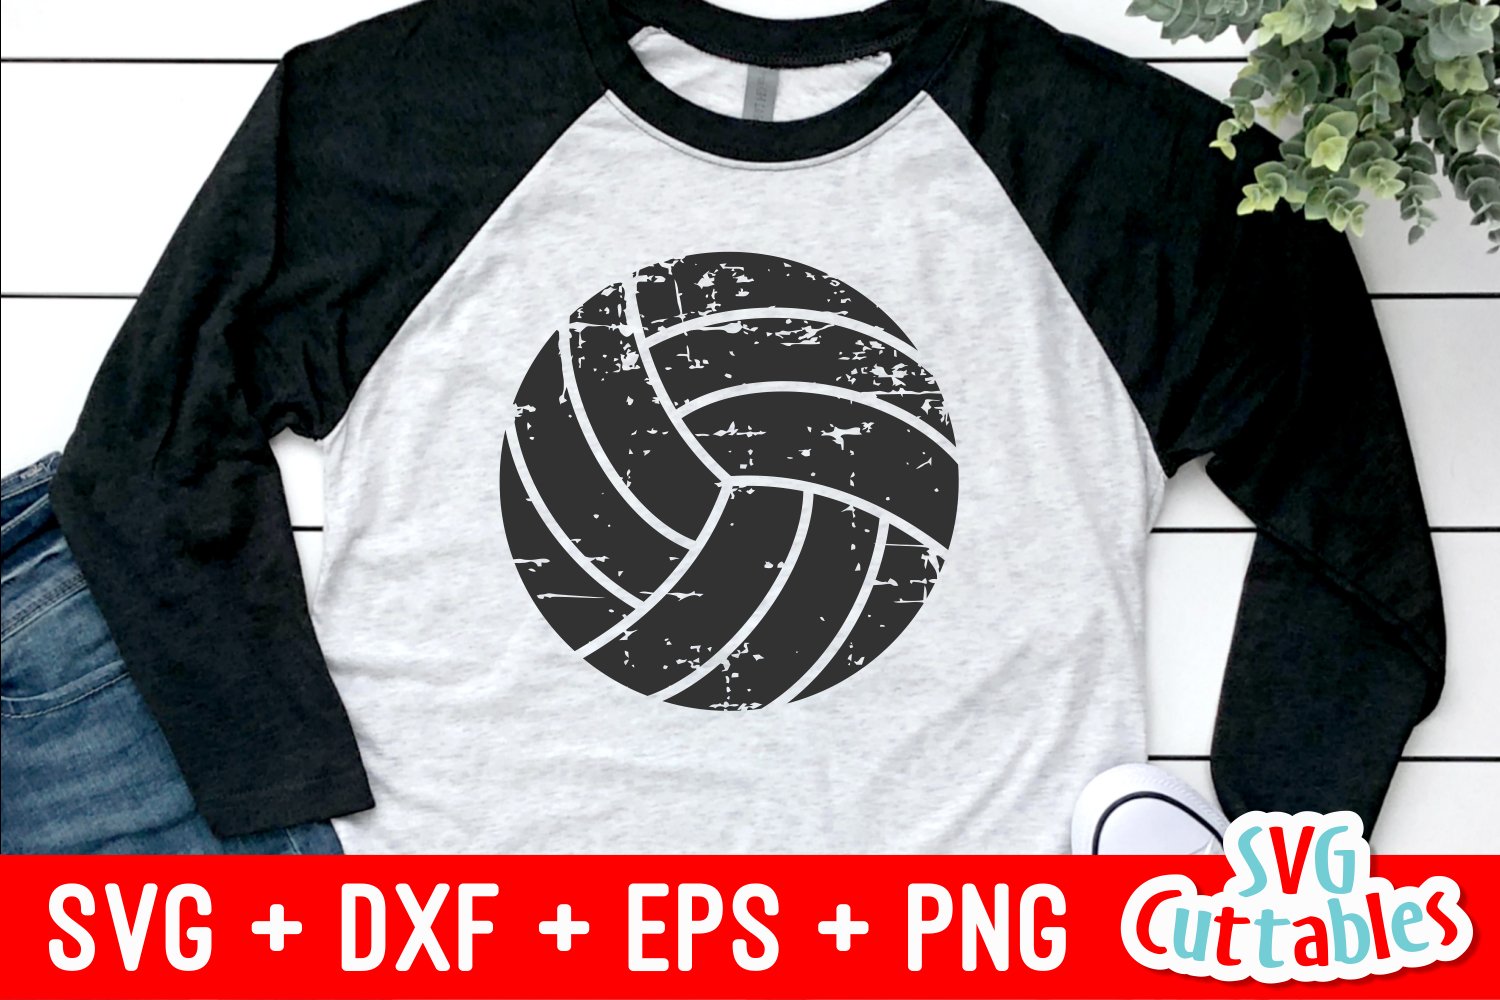 Volleyball design for clothes.